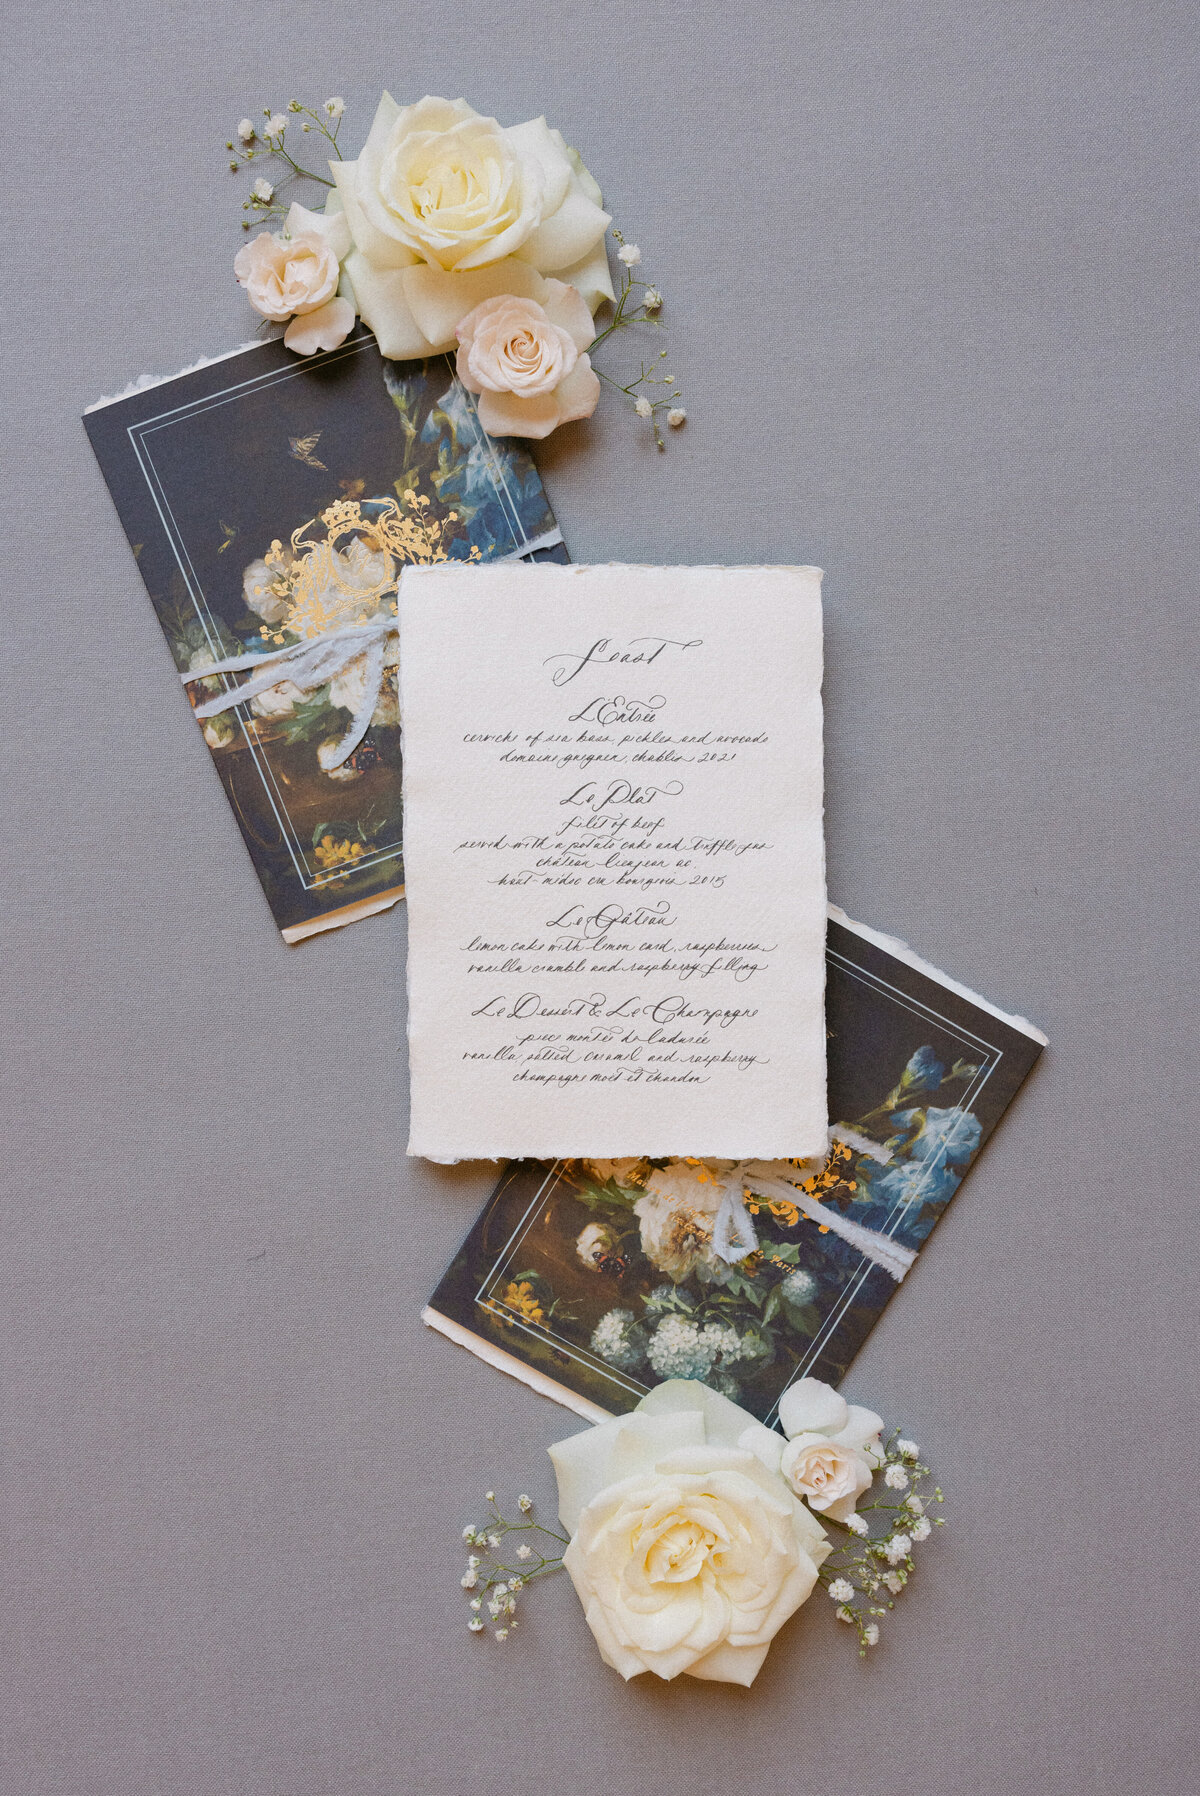 Jennifer Fox Weddings English speaking wedding planning & design agency in France crafting refined and bespoke weddings and celebrations Provence, Paris and destination wd23